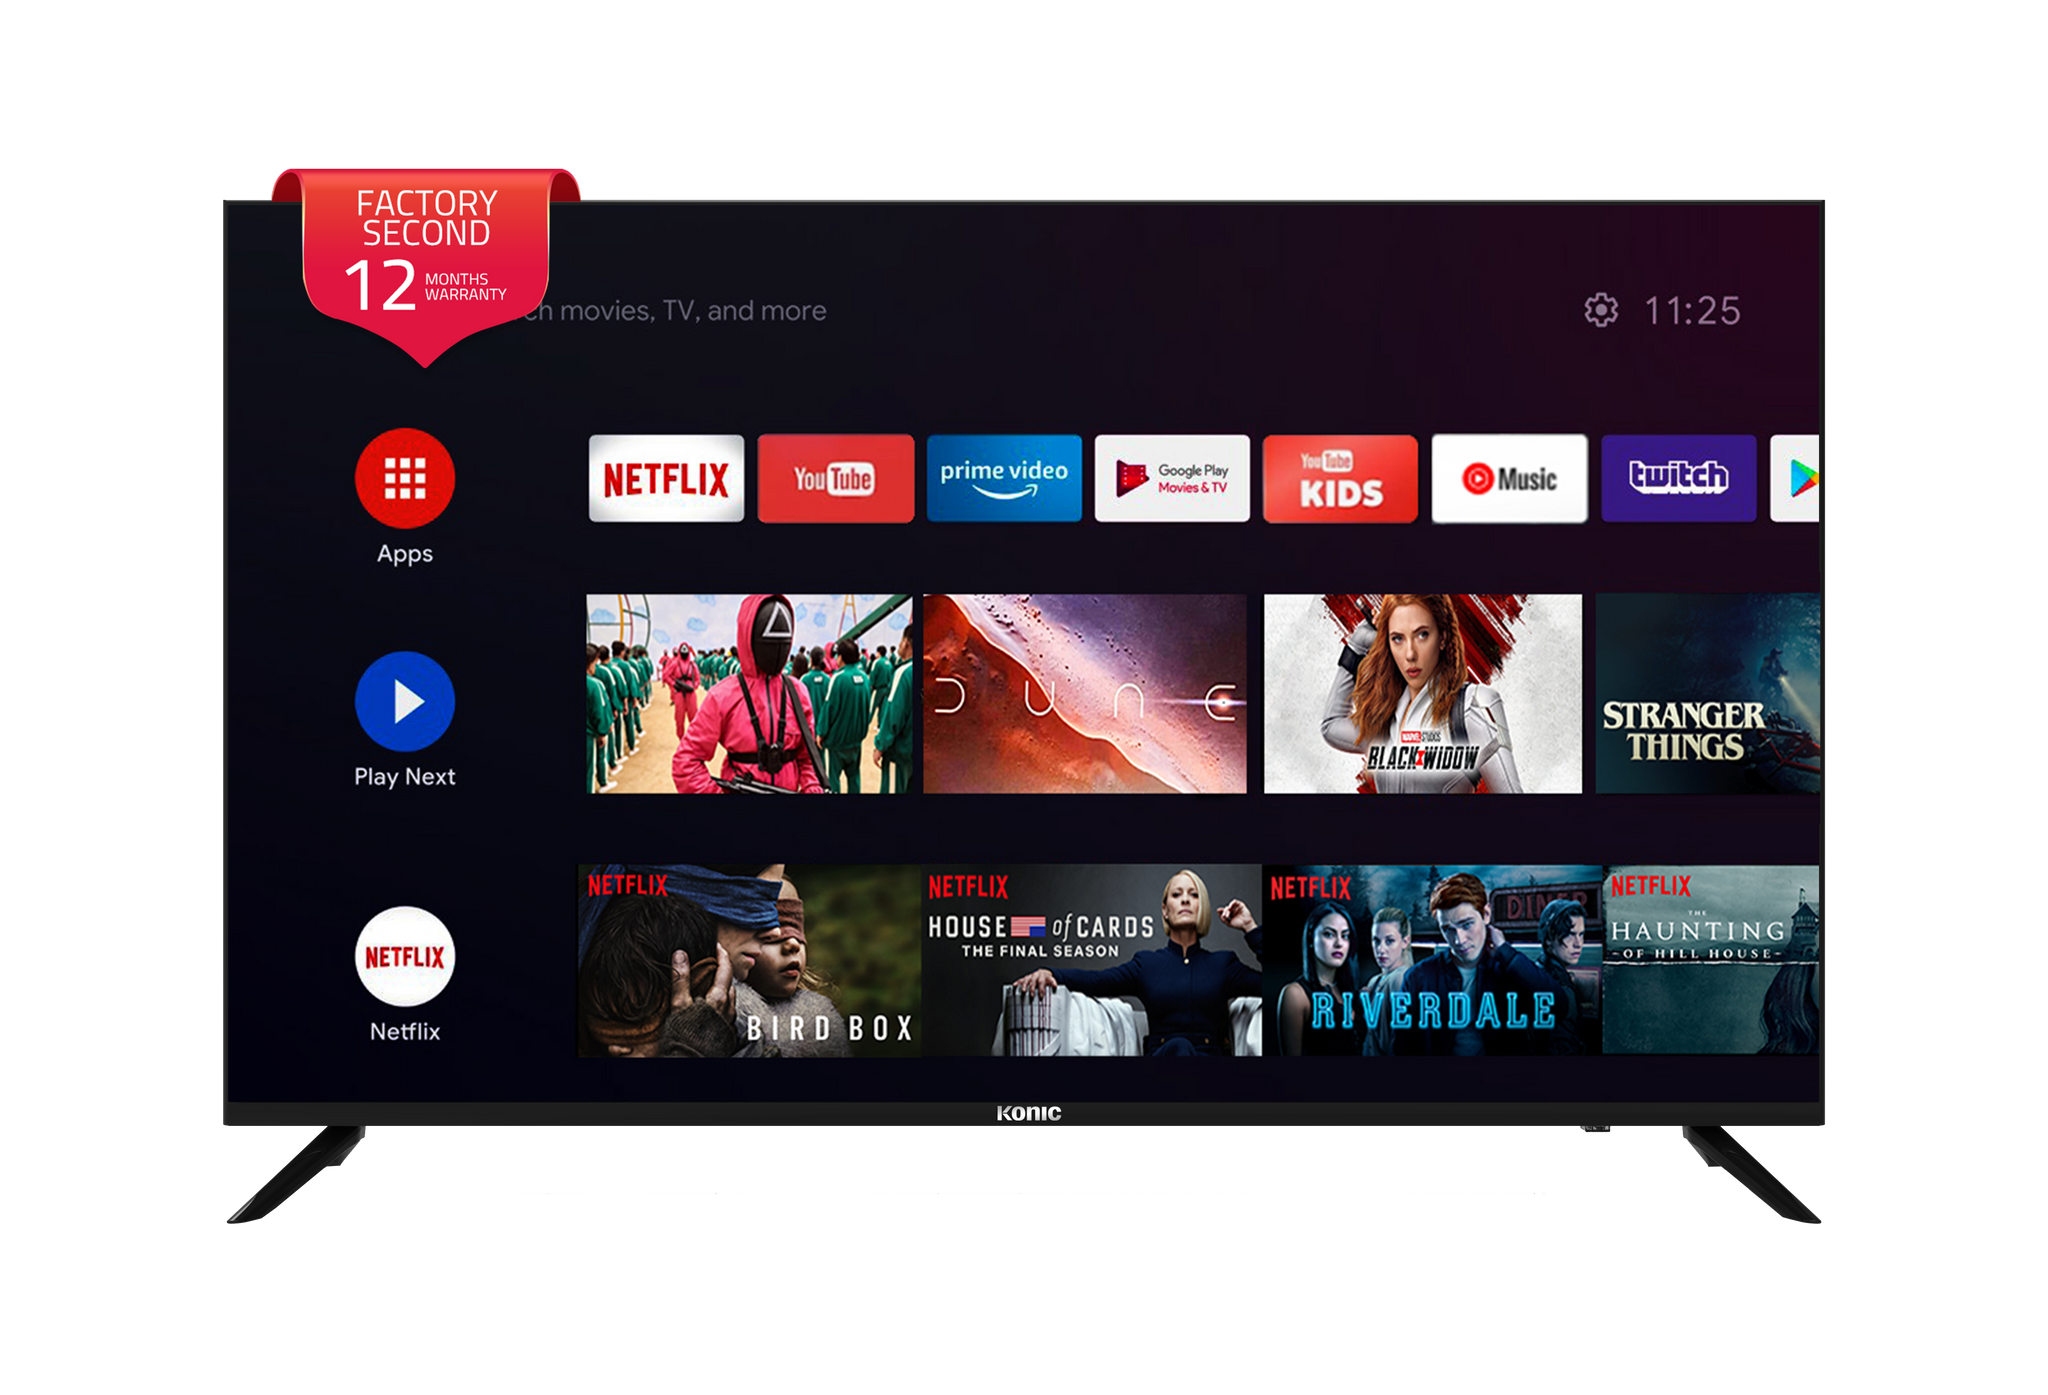 KONIC 55" 4K Smart Android TV Series 696- Factory Second TV